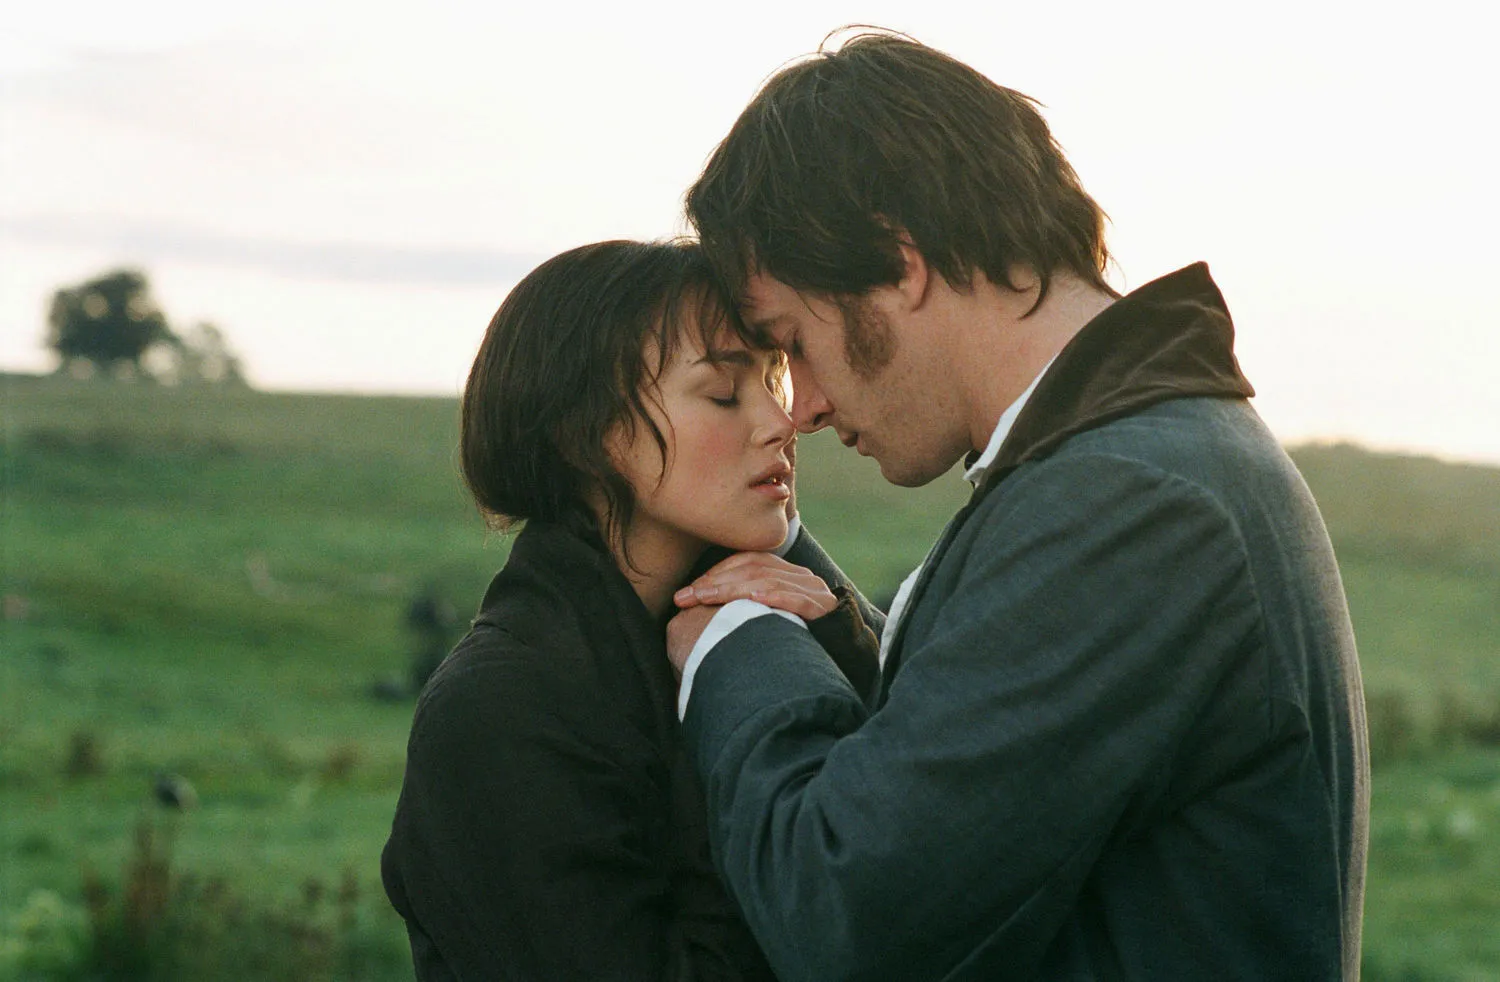 Pride and Prejudice: Mr. Darcy's Second Proposal-Romantic & Hot Hollywood Scenes